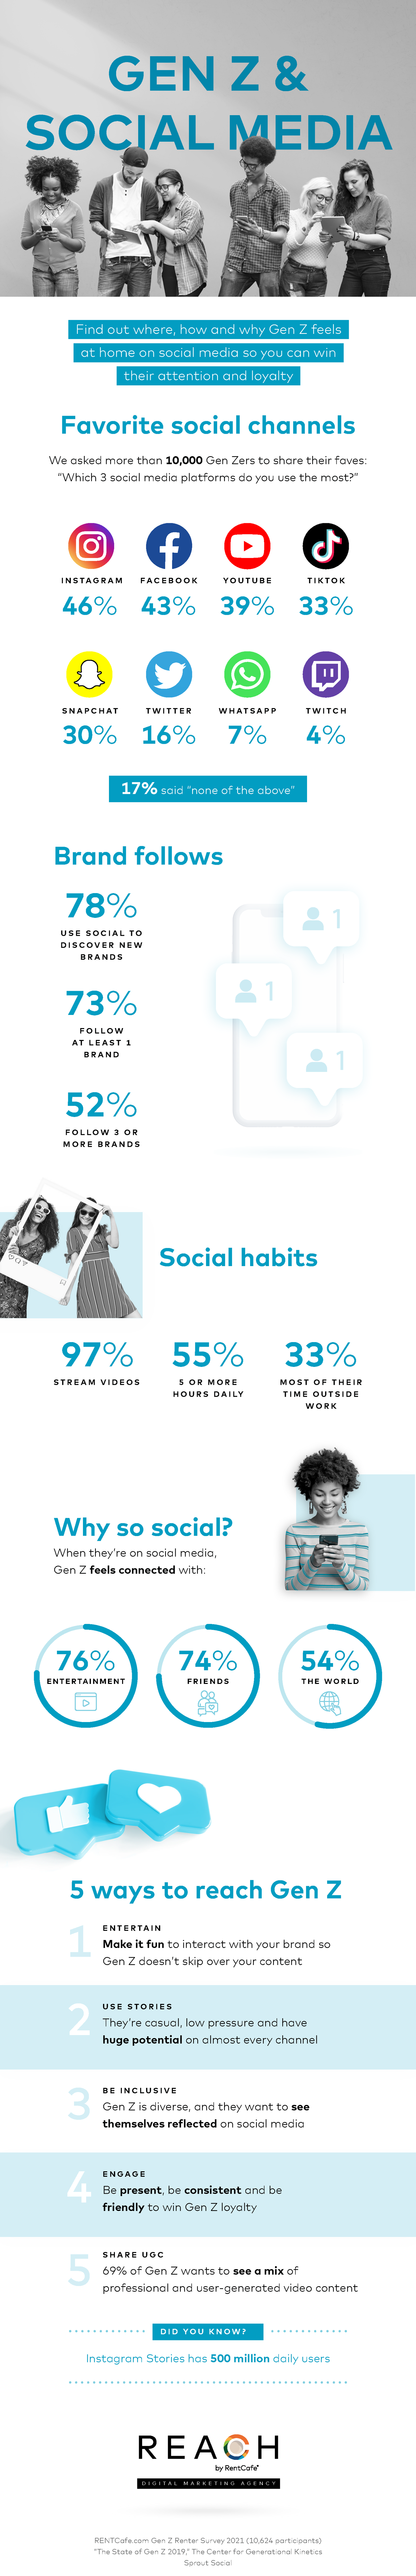 Gen Z social media infographic displaying results of a survey of 10,624 renters